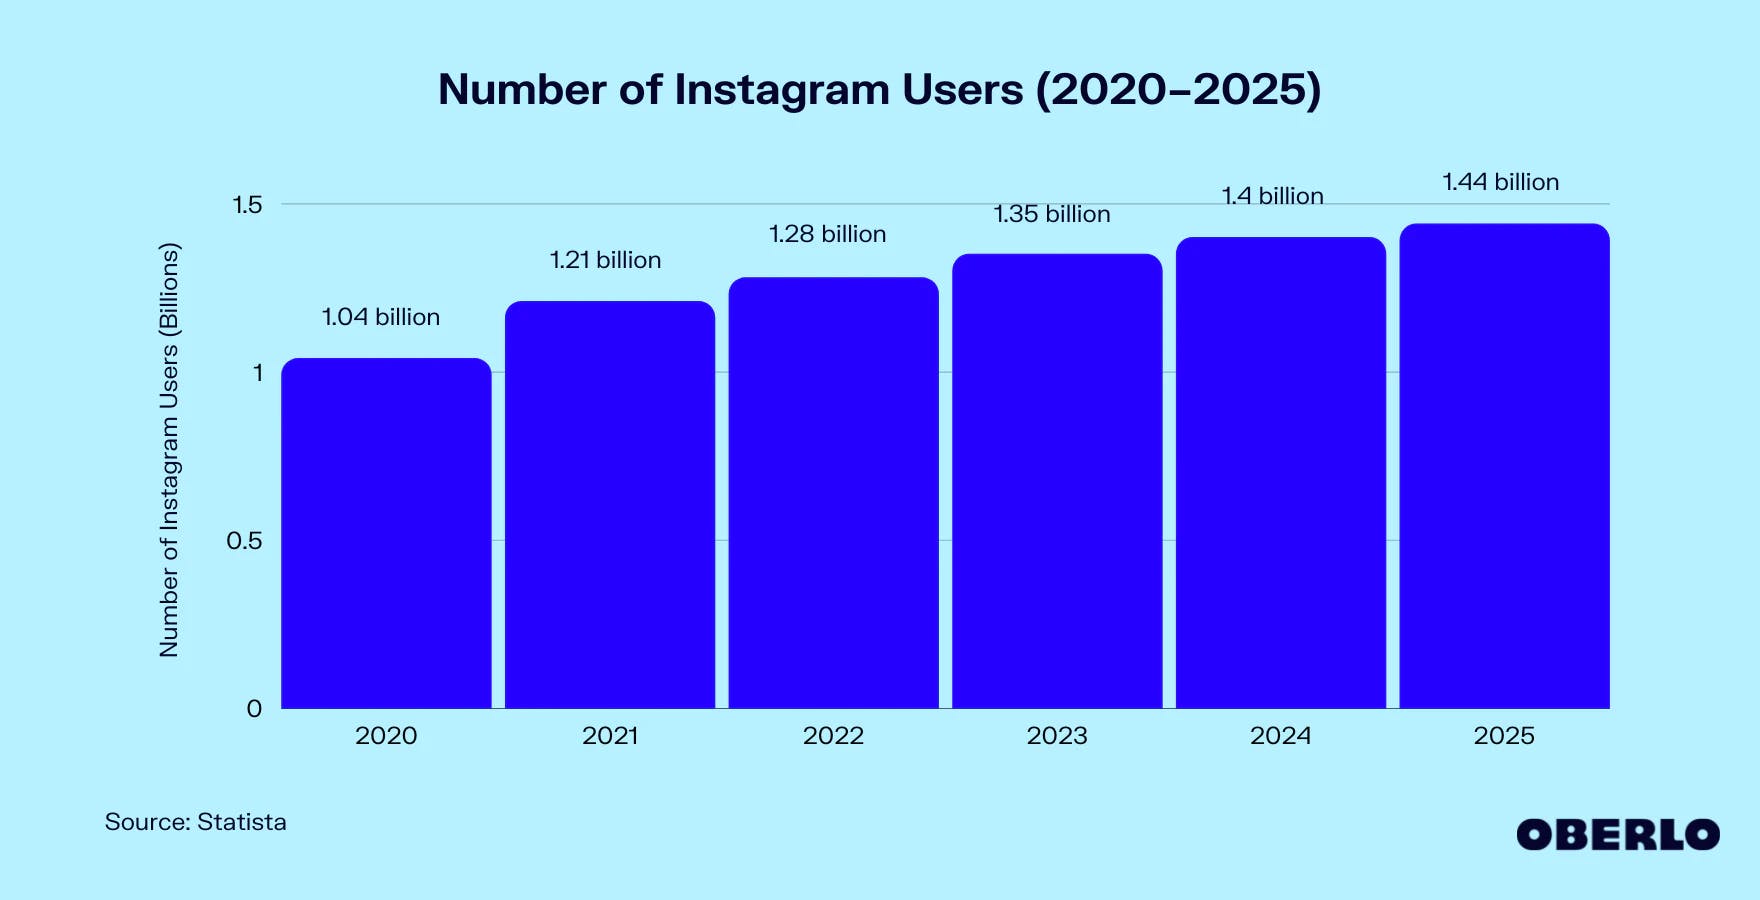 Number of Instagram users in 2023 is projected to reach 1.36 bilion